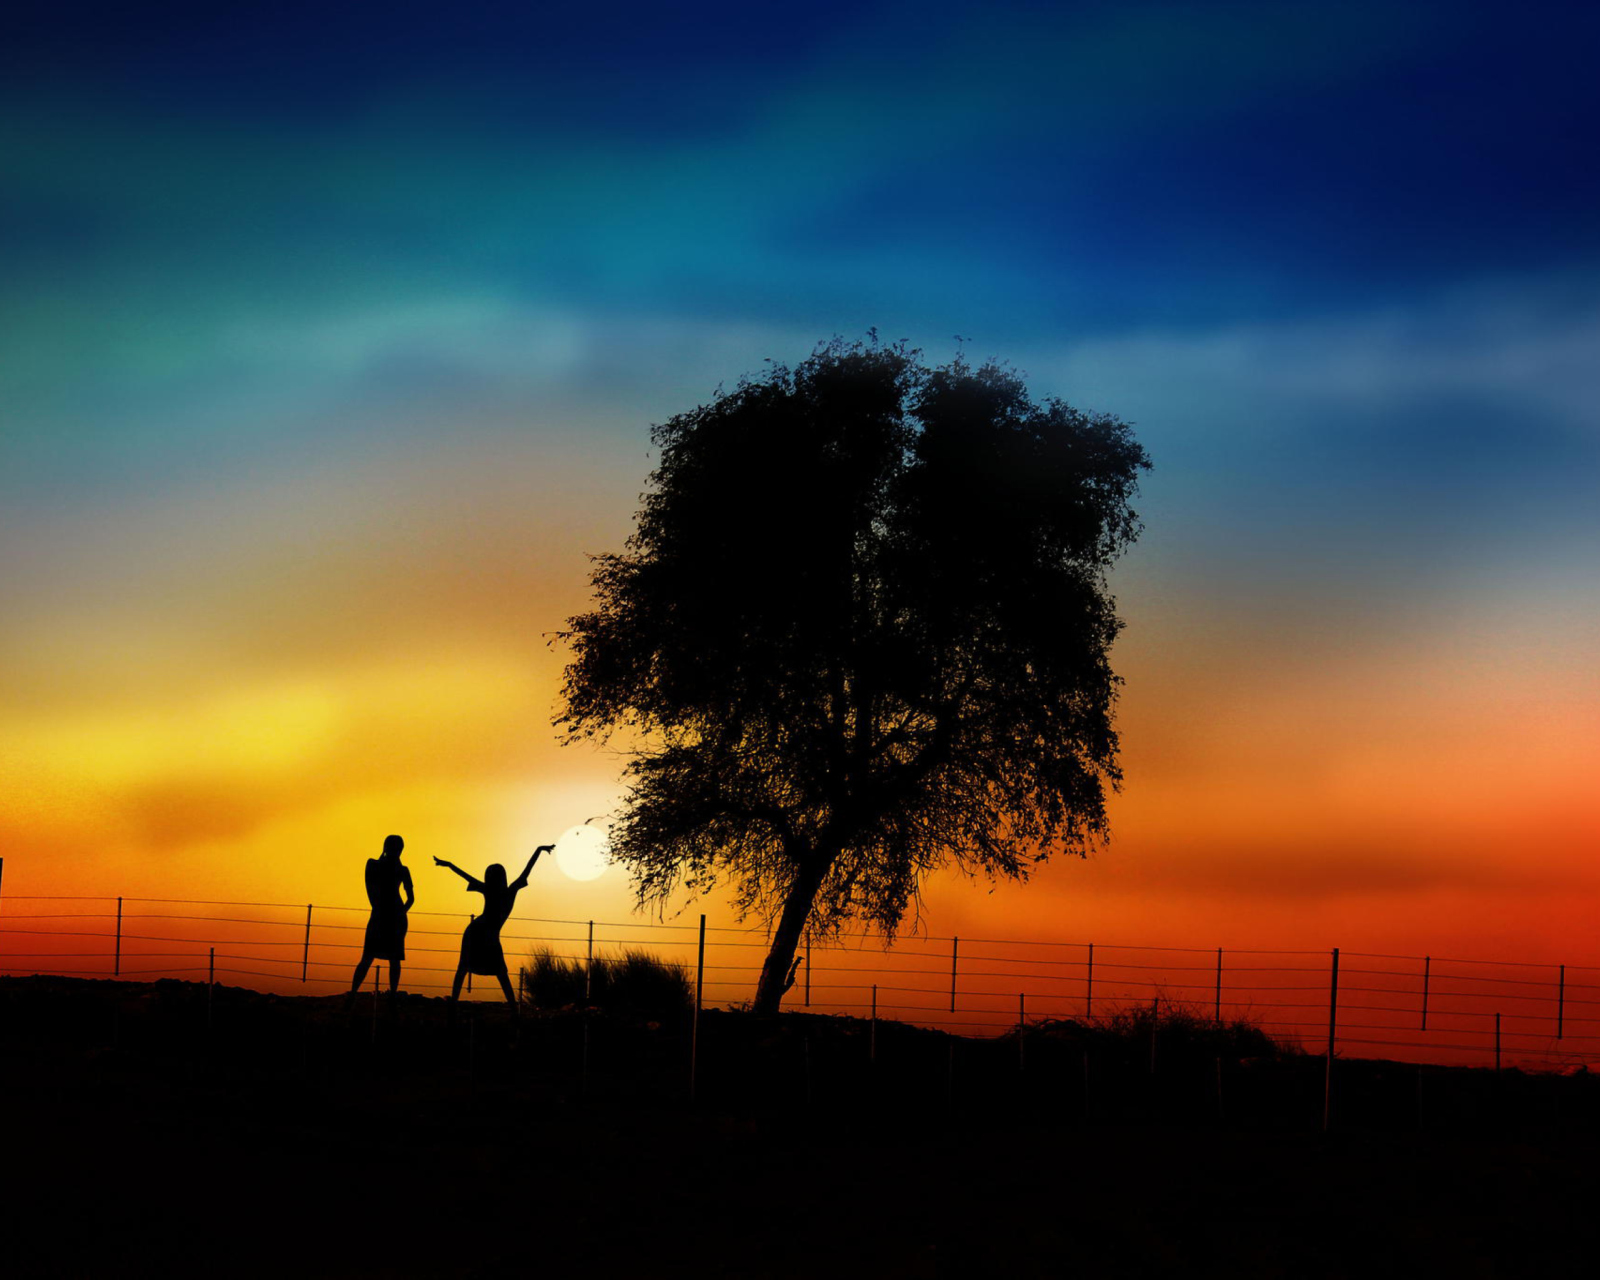 Couple Silhouettes Under Tree At Sunset wallpaper 1600x1280